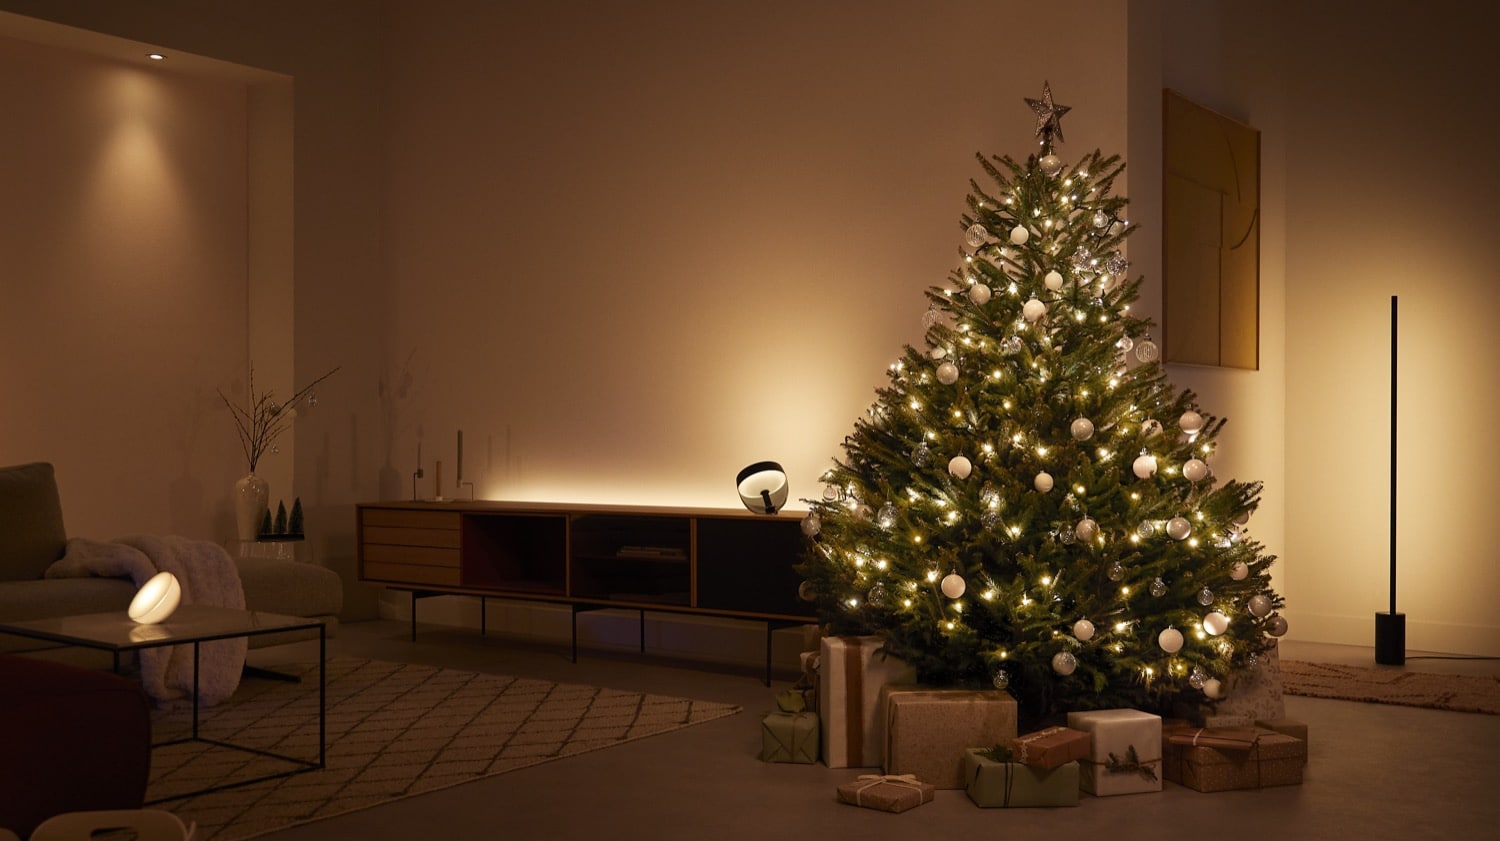 Hueblog: The most important answers about Philips Hue Festavia